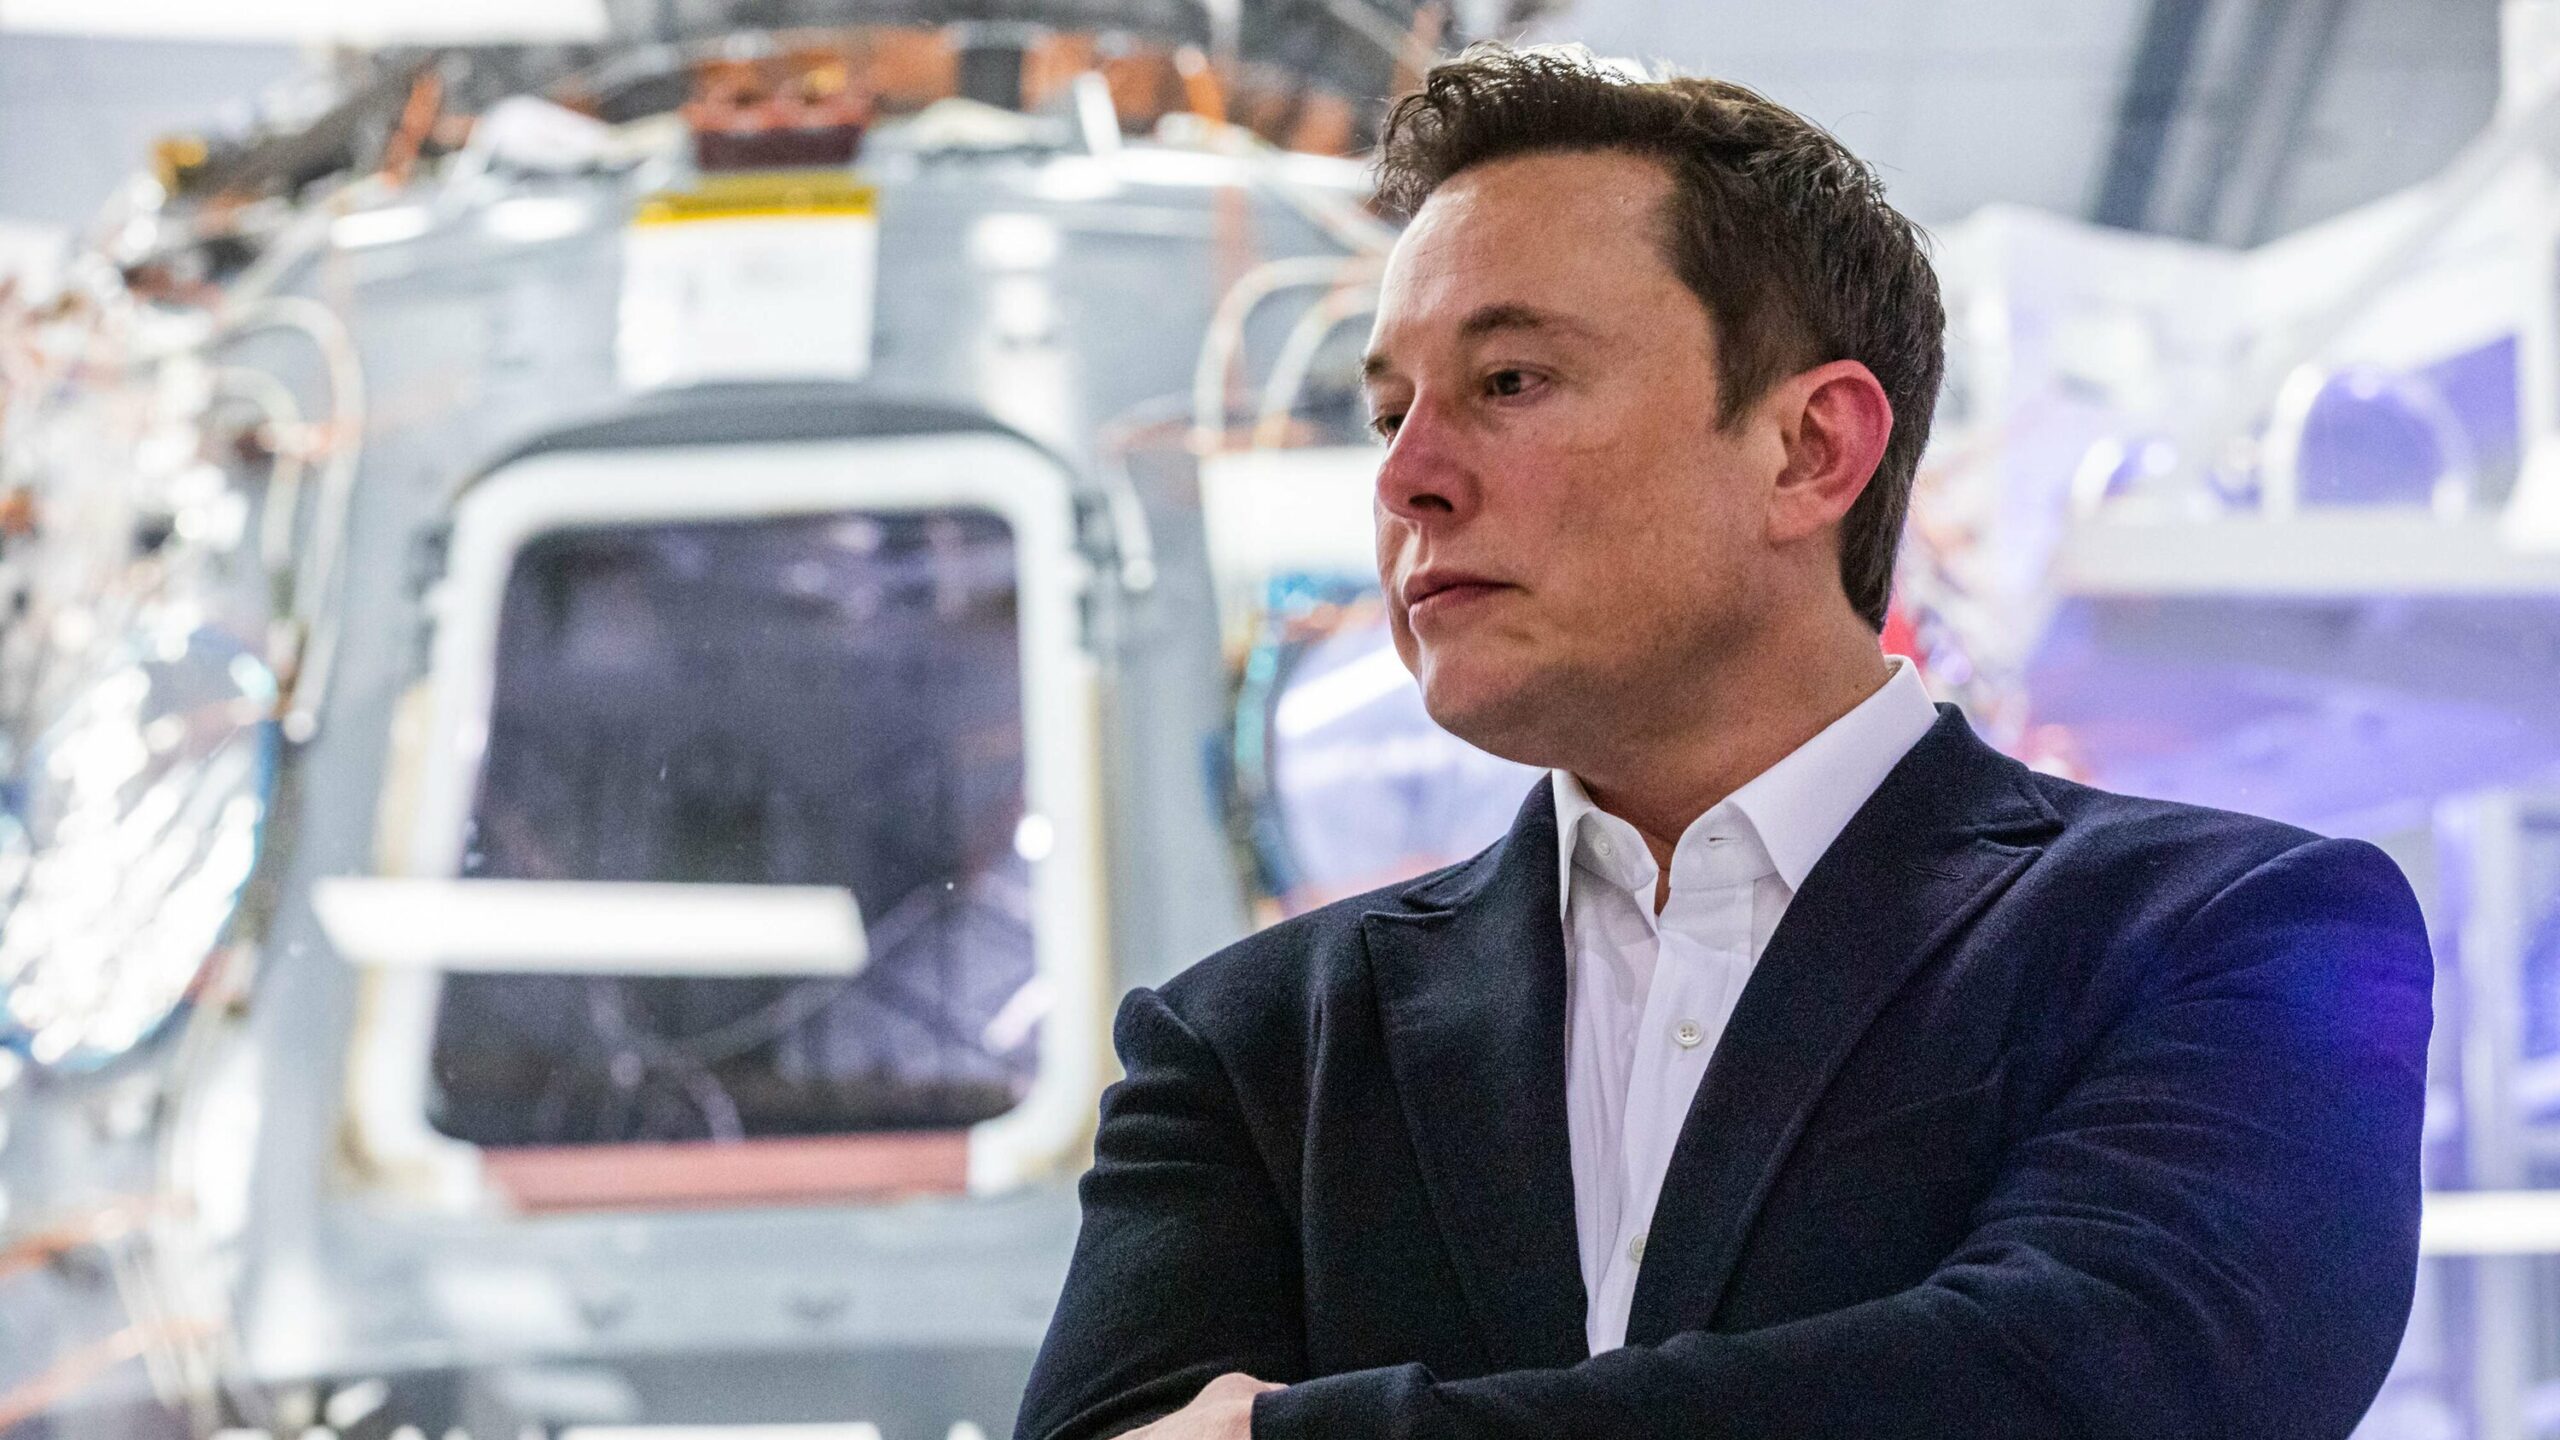 Elon Musk makes new post-COVID work rules for Tesla and SpaceX